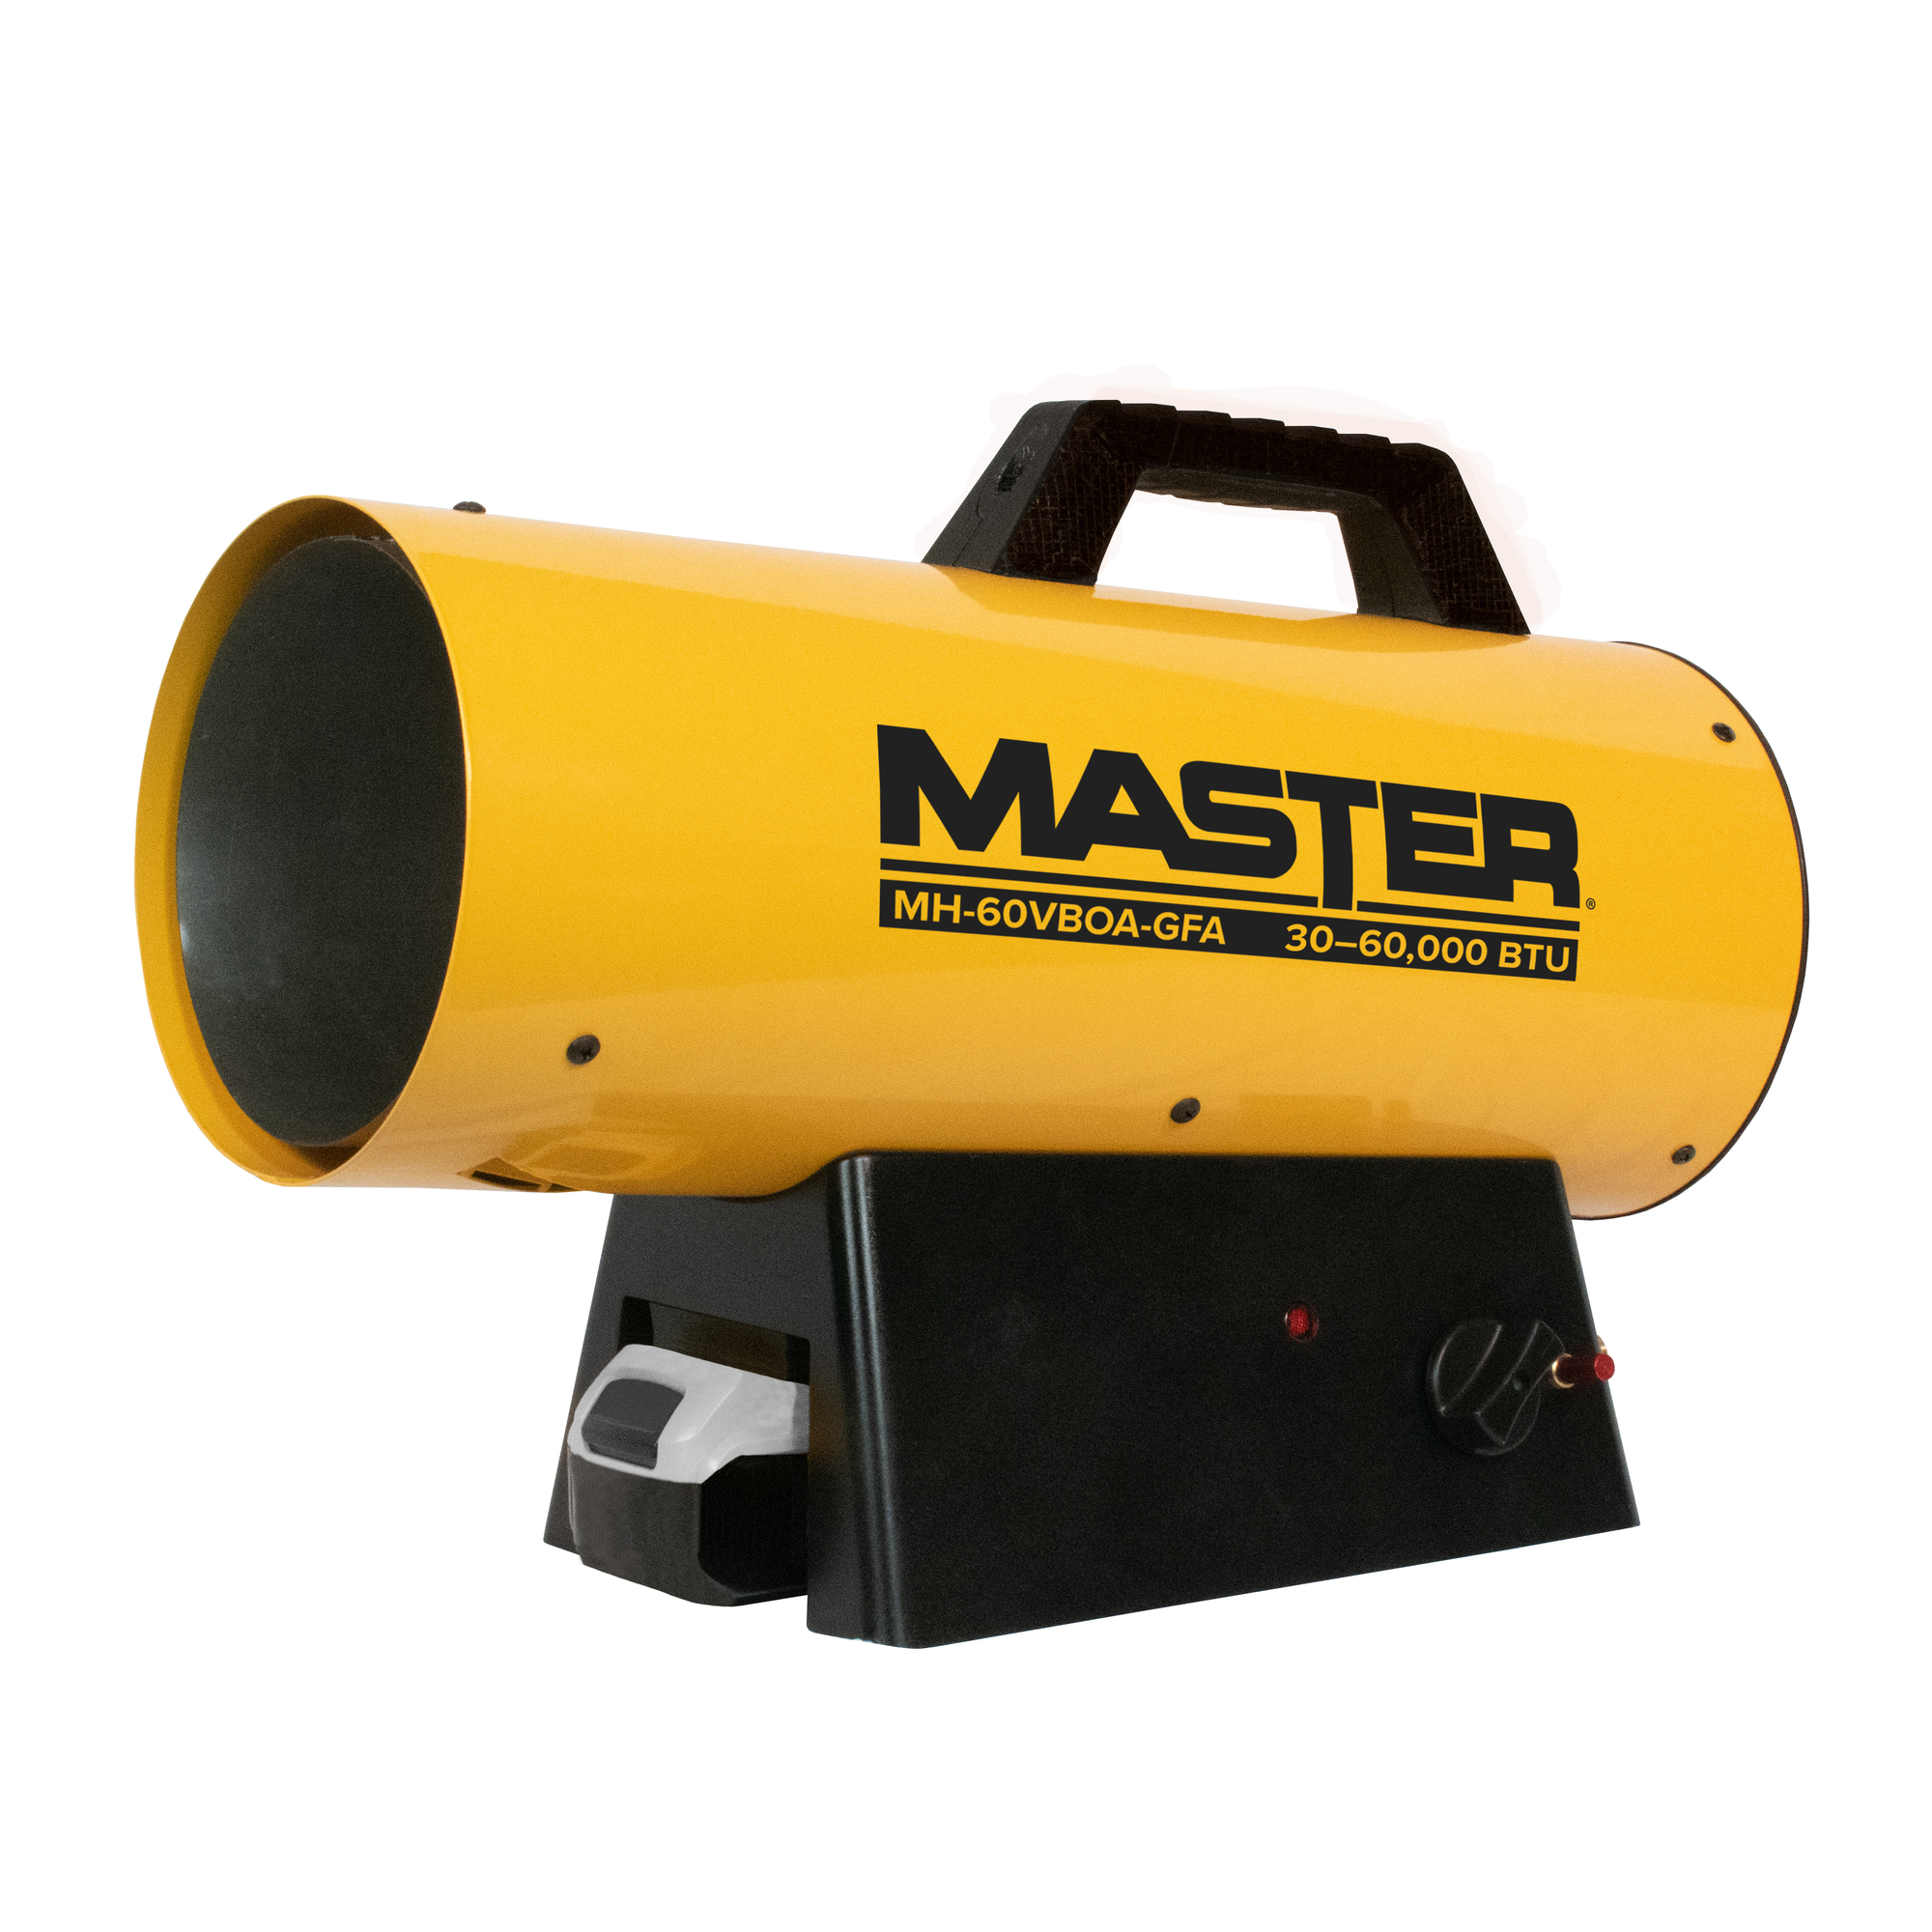 Master, Battery Operated LP Forced Air Heater, Fuel Type Propane, Max. Heat Output 60000 Btu/hour, Heat Type Forced Air, Model MH-60VBOA-GFA